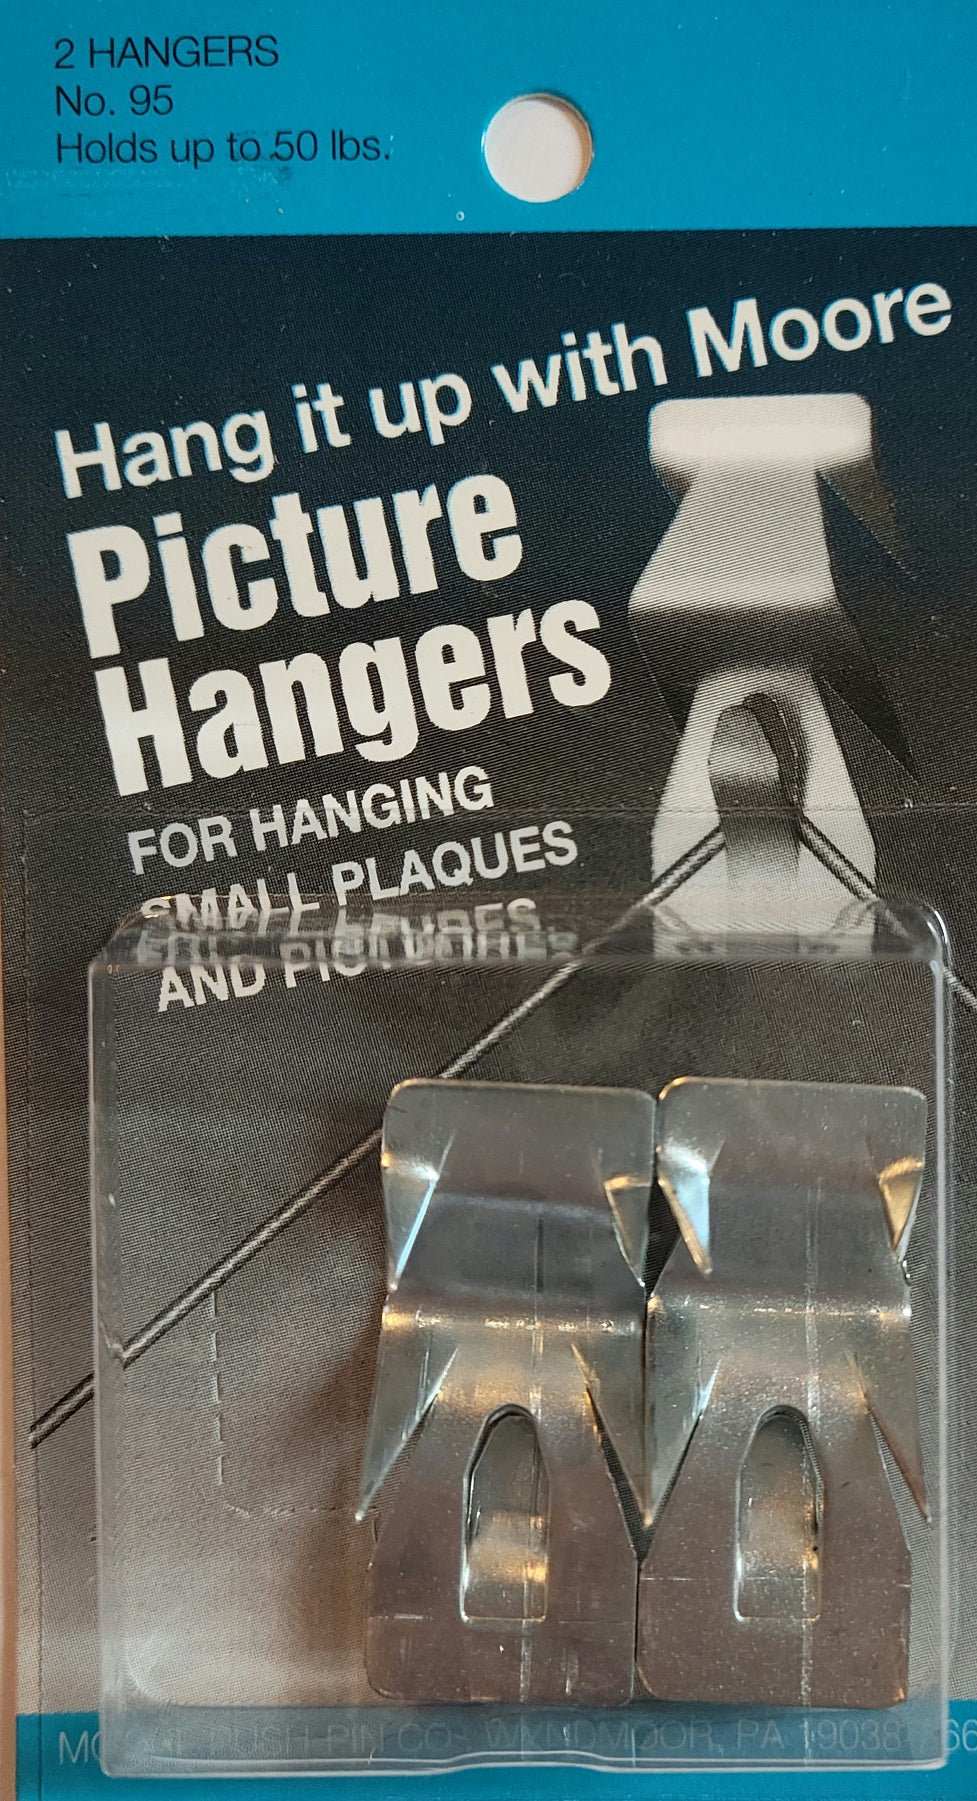 Picture Hangers, Moore Push-Pin Co – Viking Woodcrafts